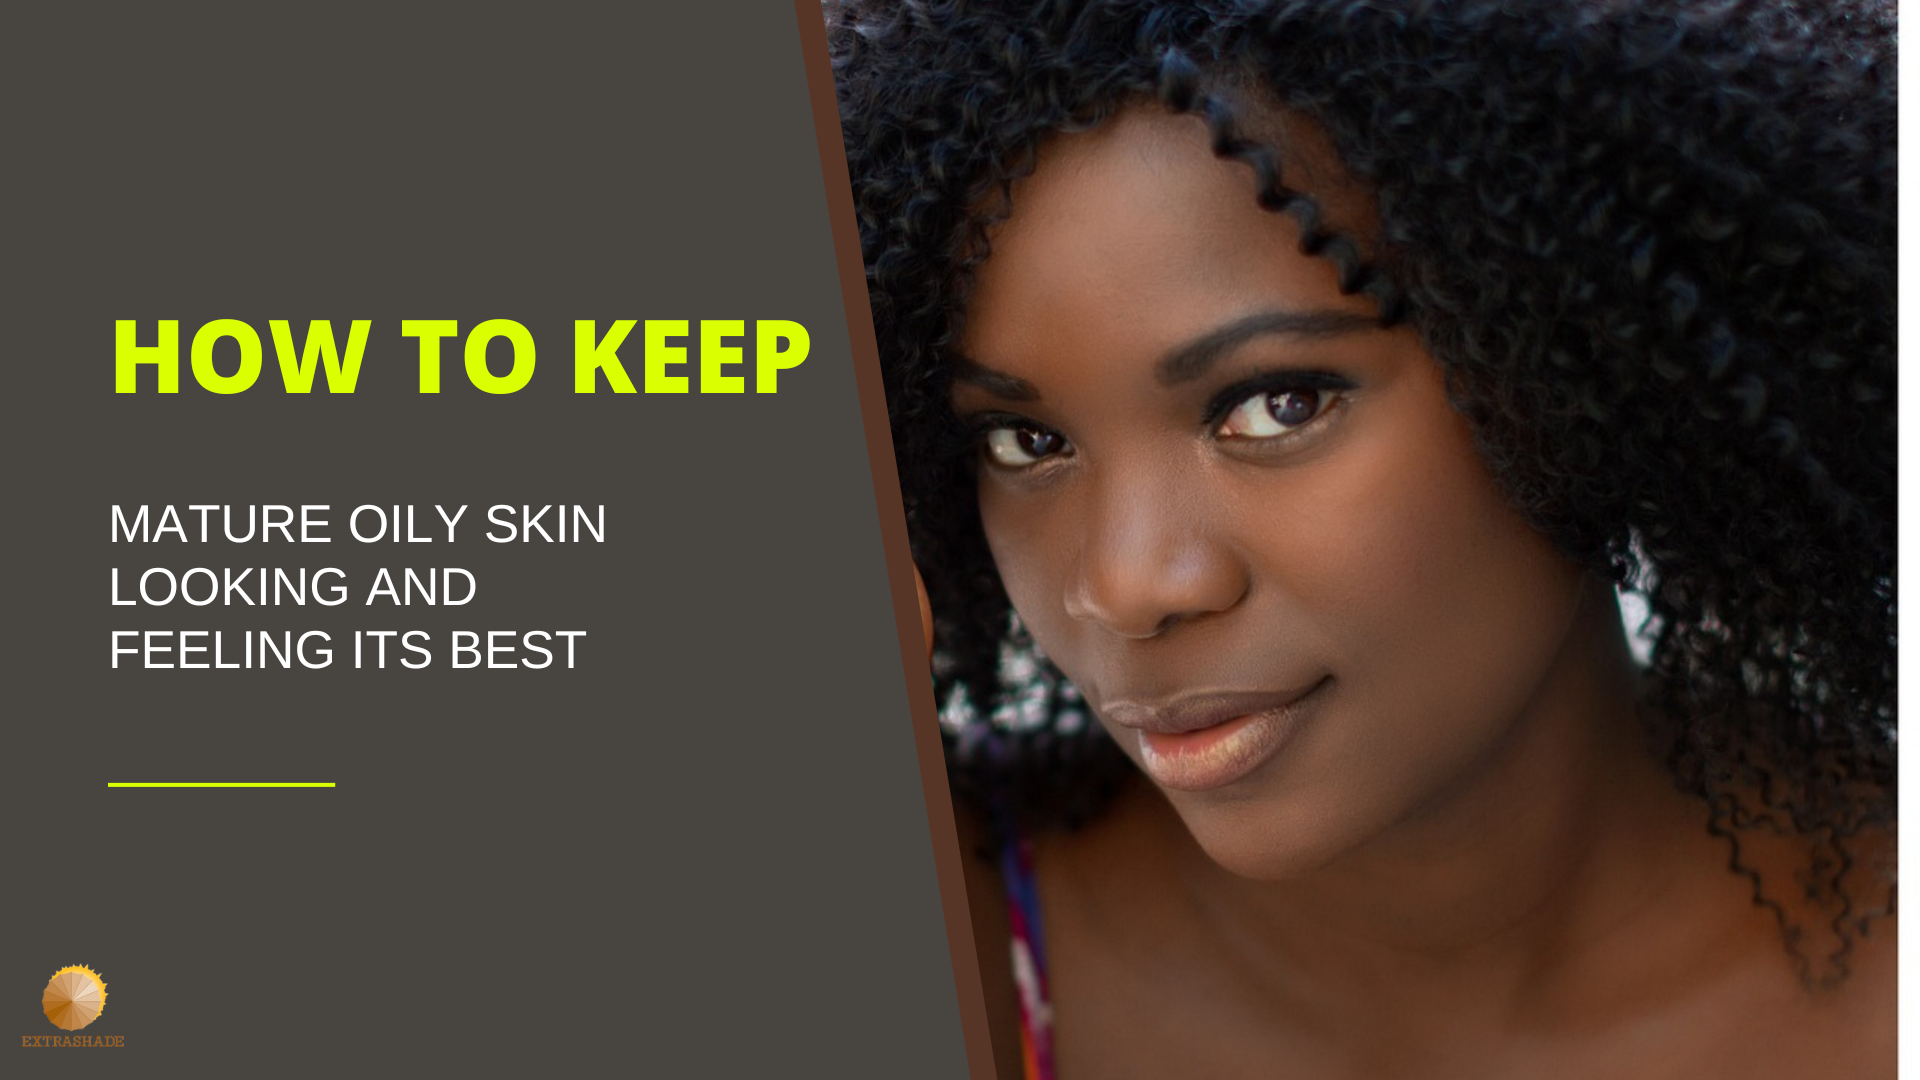 How to Keep Mature Oily Skin Looking and Feeling Its Best